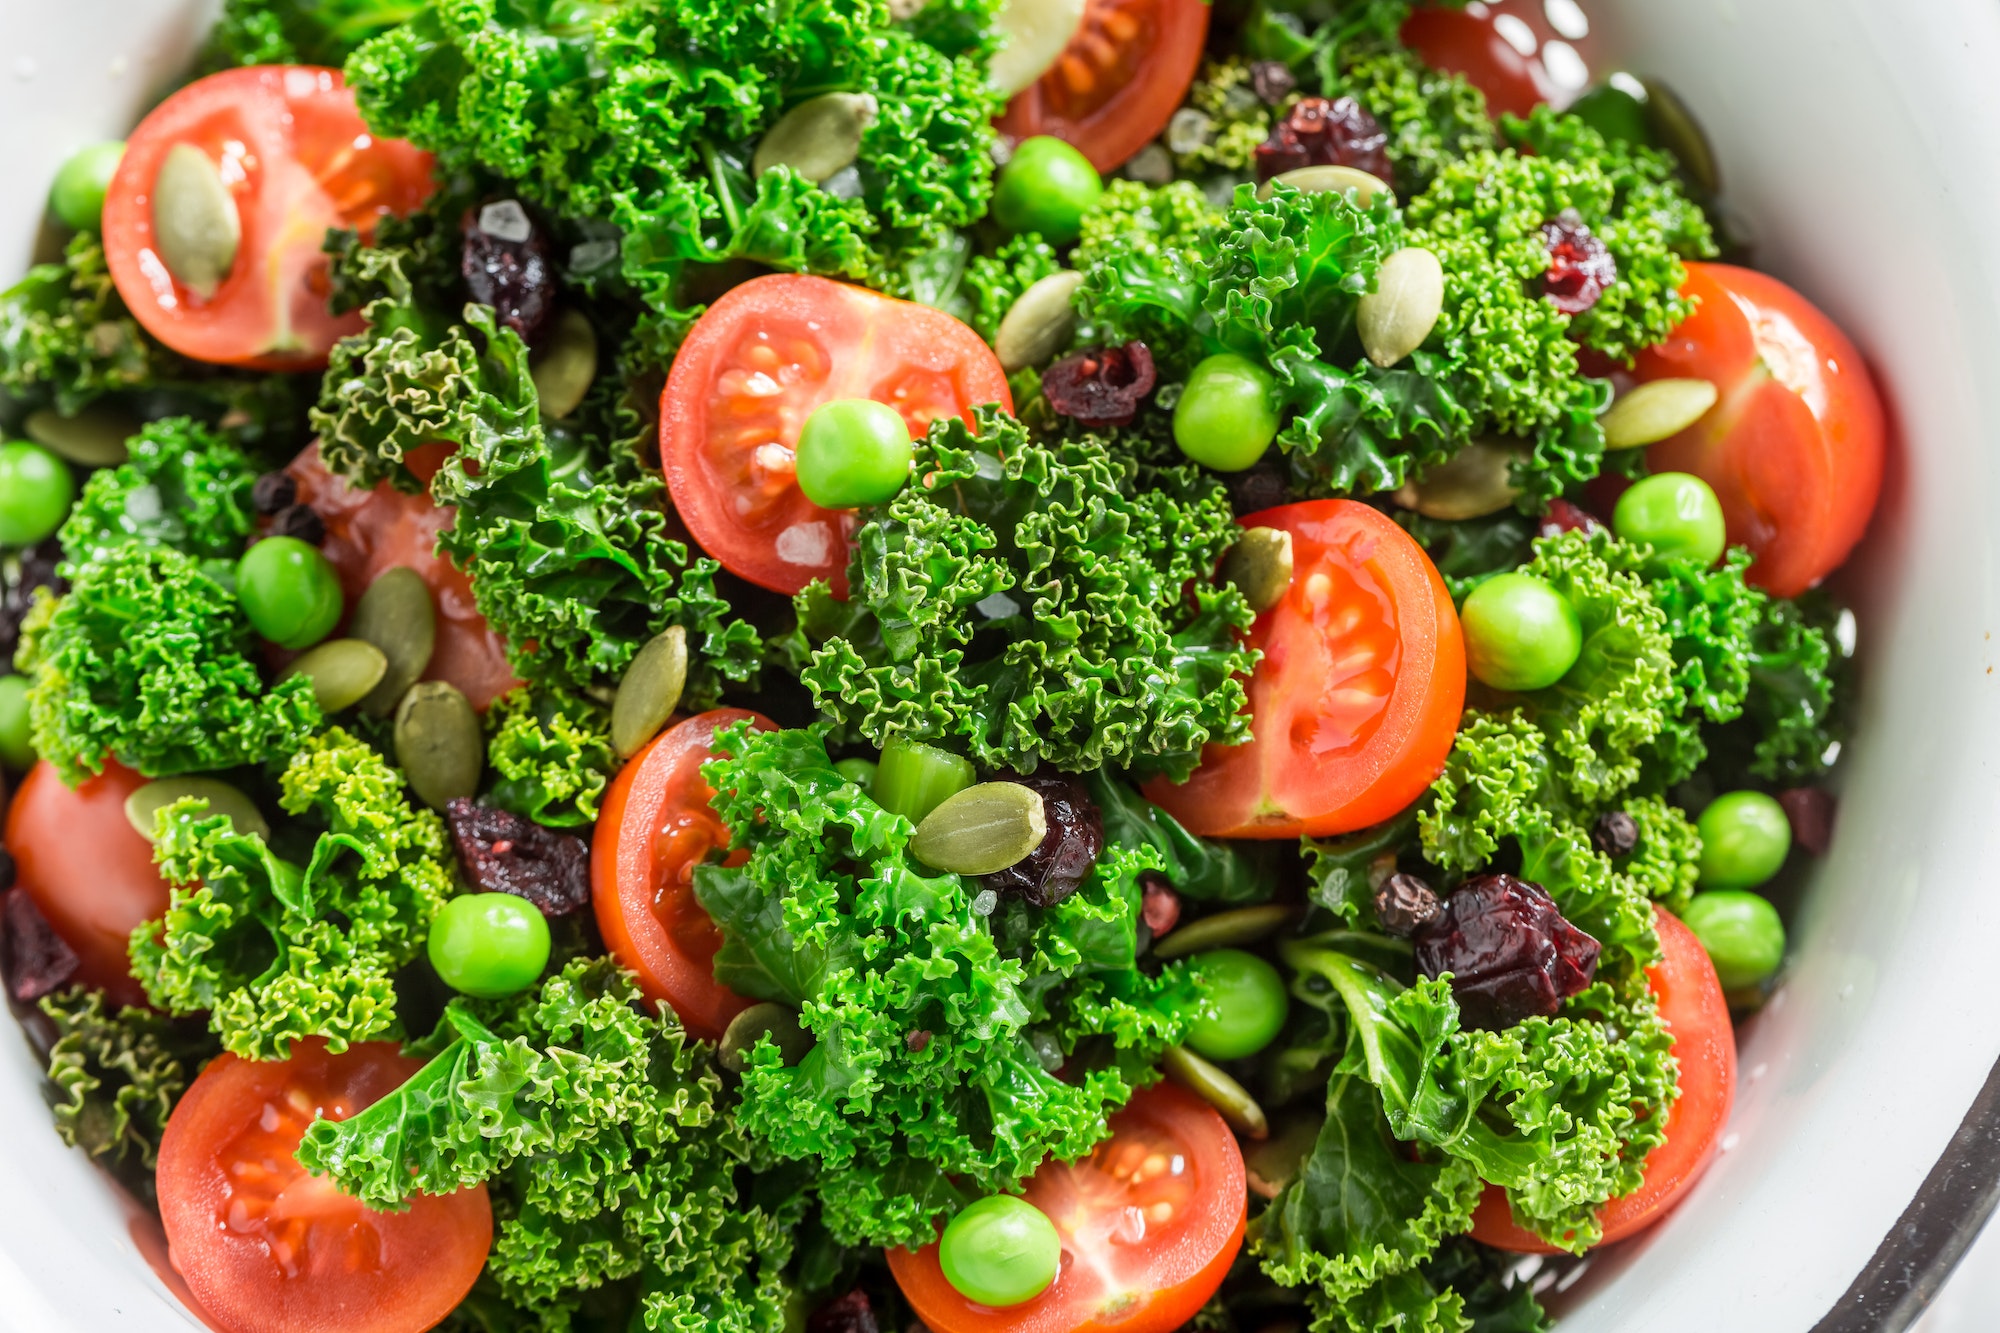 Closeup of diet kale salad full of vitamin and minerals